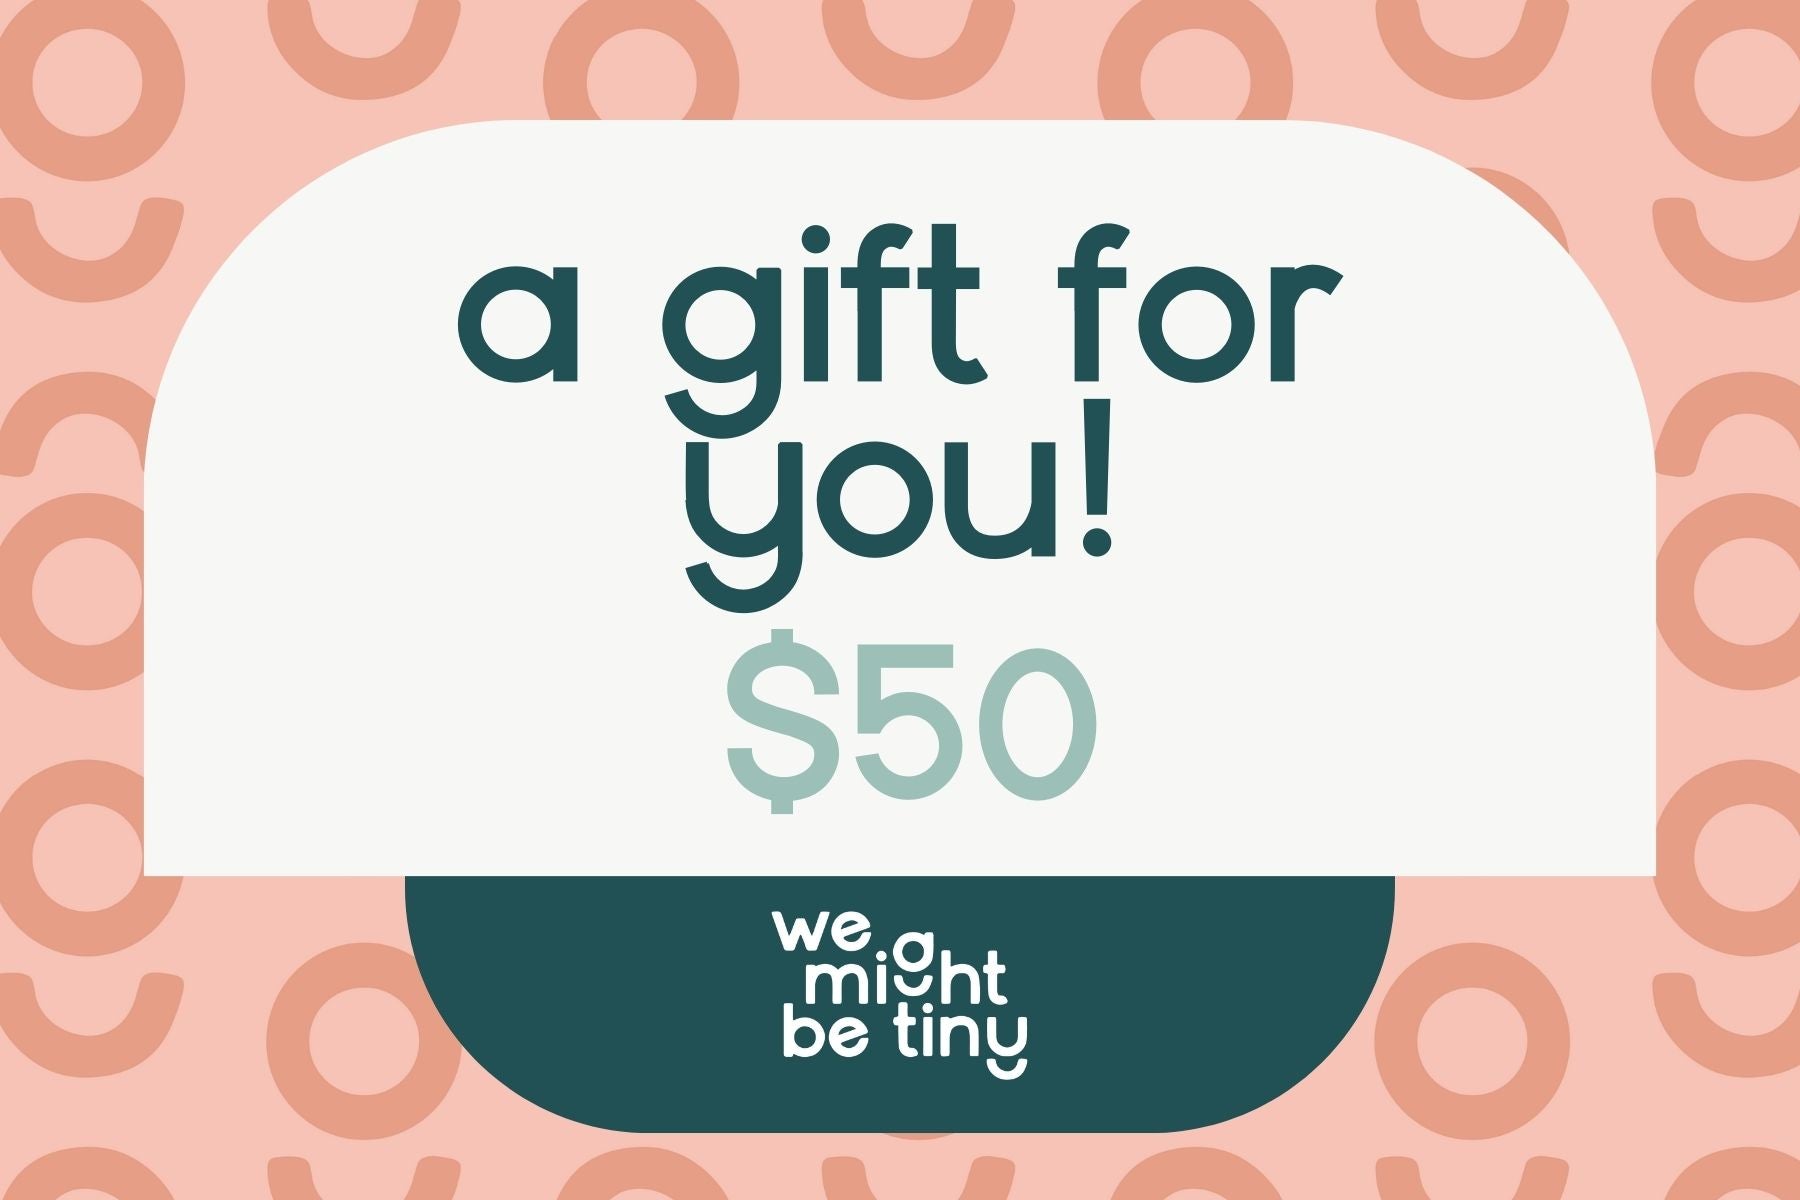 Gift Voucher - We Might Be Tiny $50